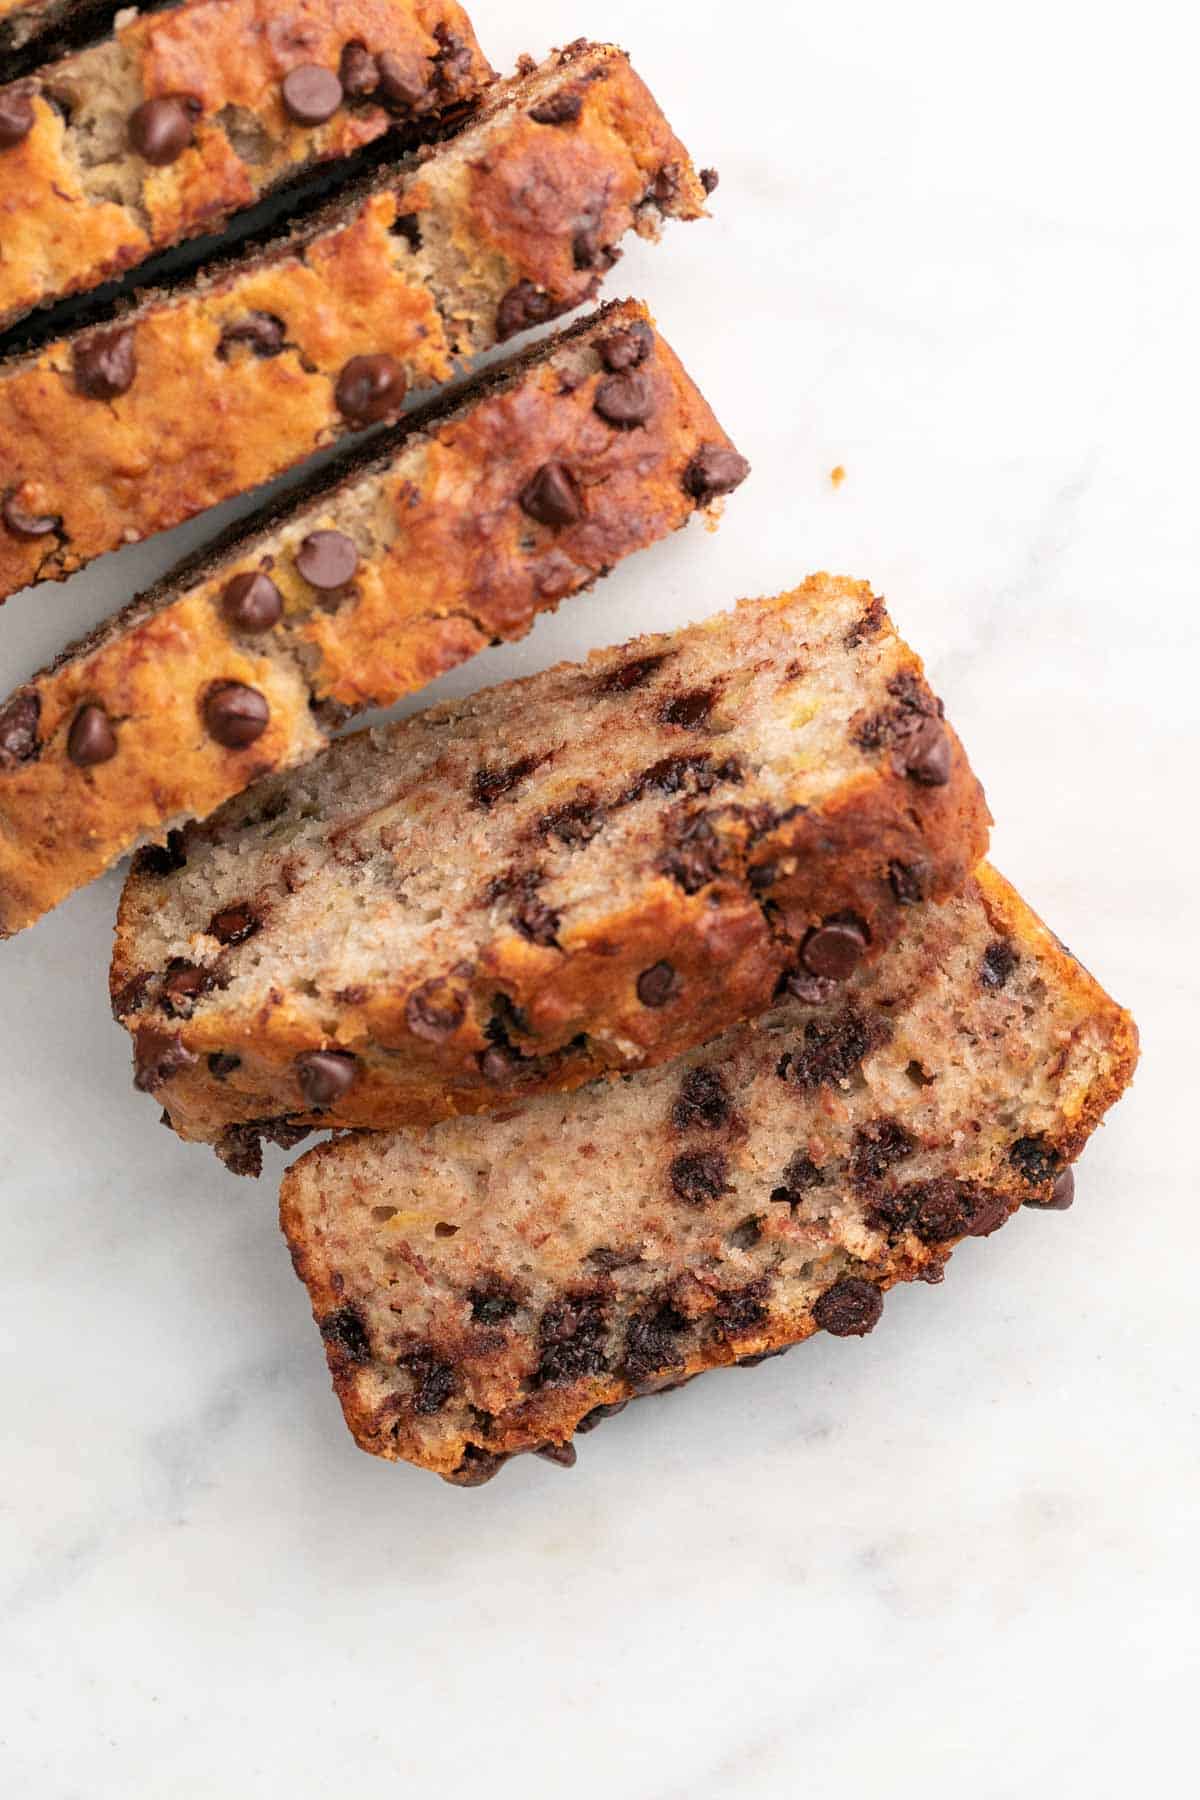 A sliced vegan banana bread on a marble background.